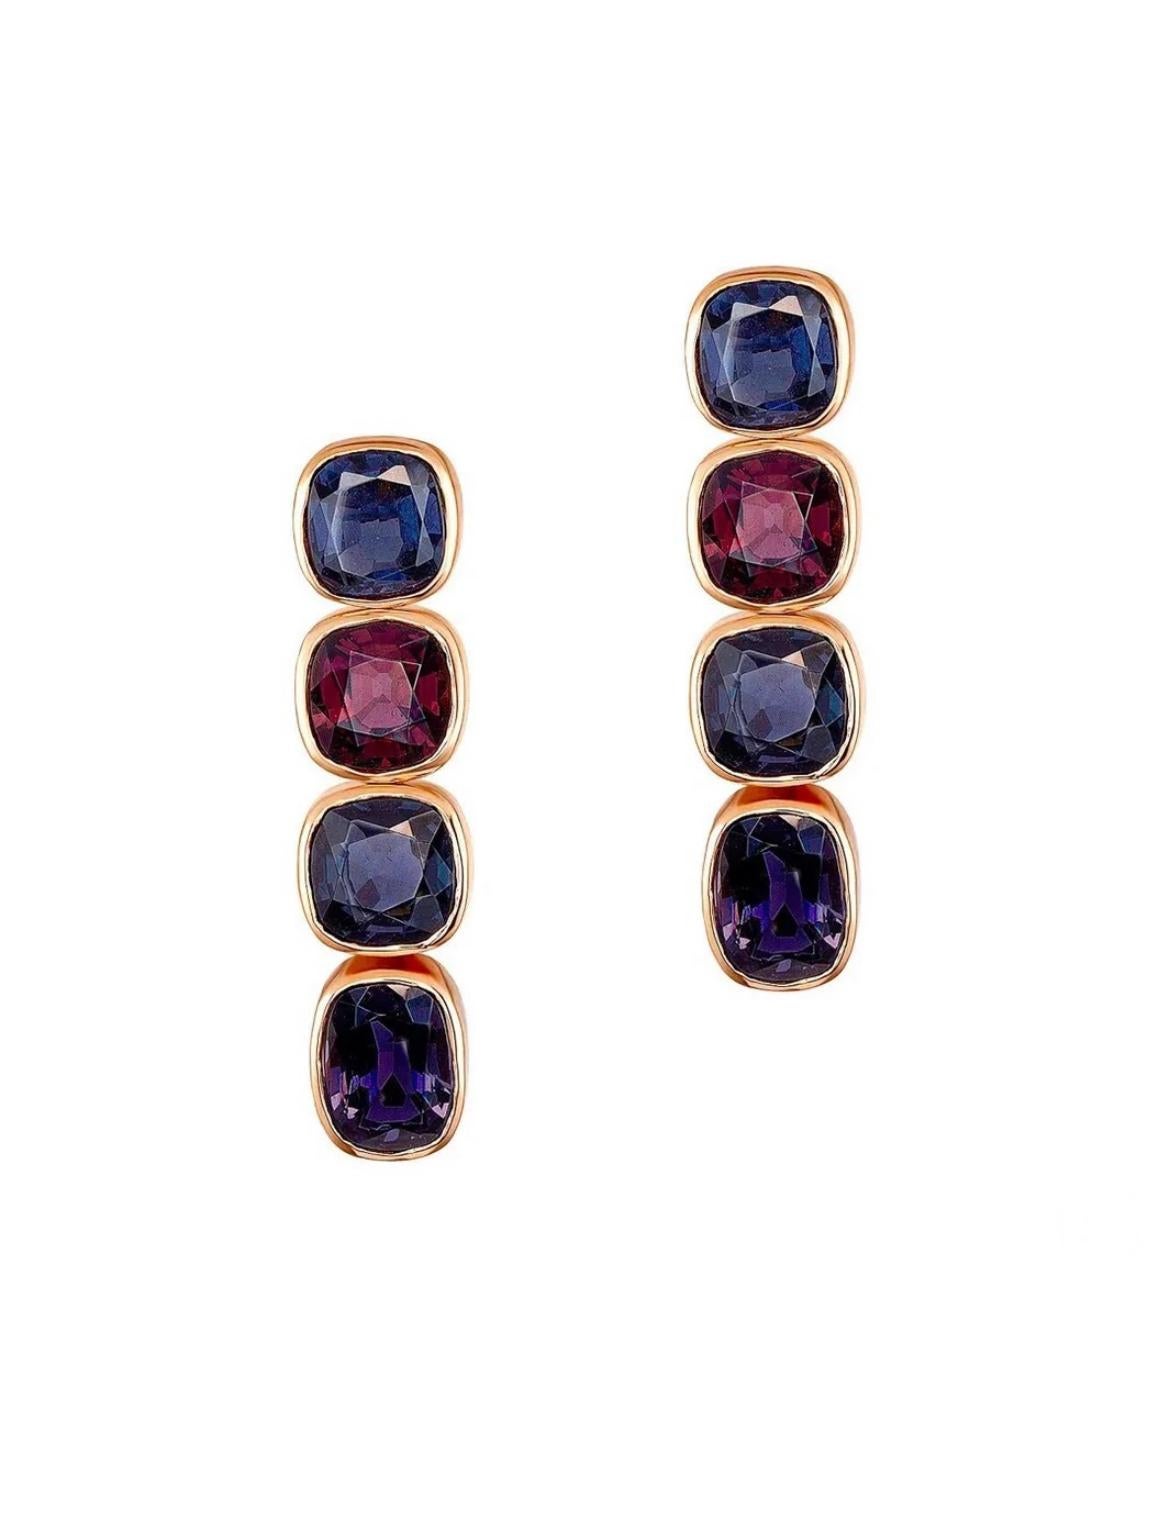 Eight untreated Burmese Spinels totaling 24.13 carats, present a distinctive coloration of hues in these exuberant 18K rose gold earrings. 